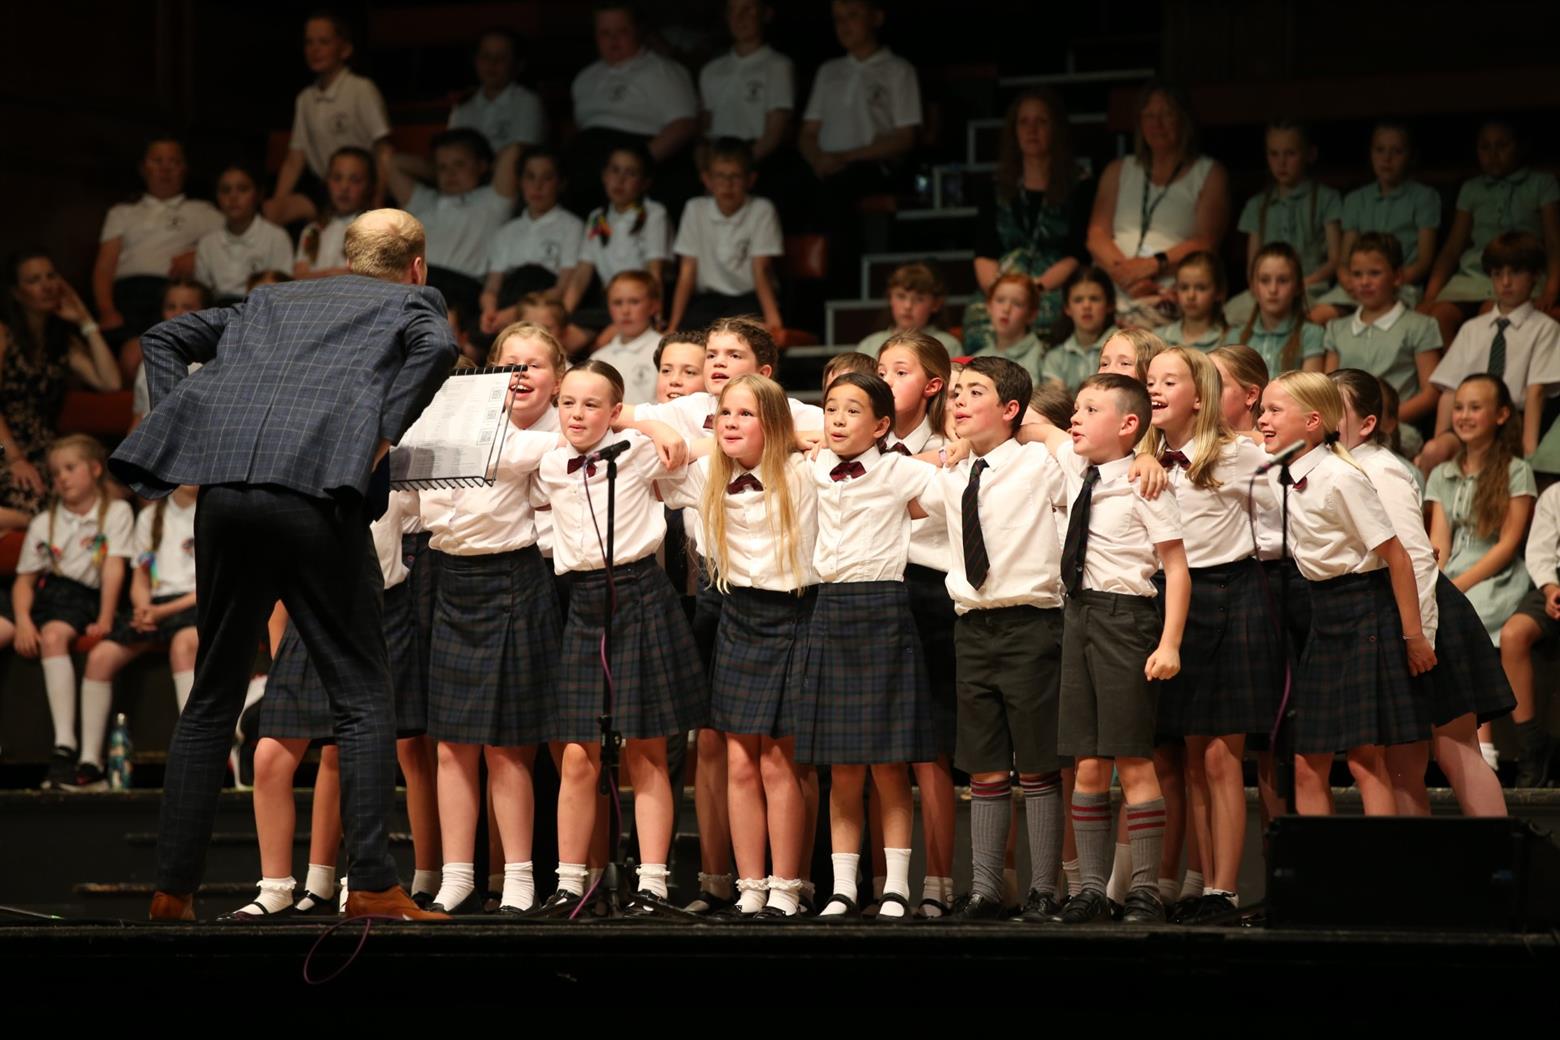 Prep Chamber Choir take home trophy after competing in Last Choir Singing competition